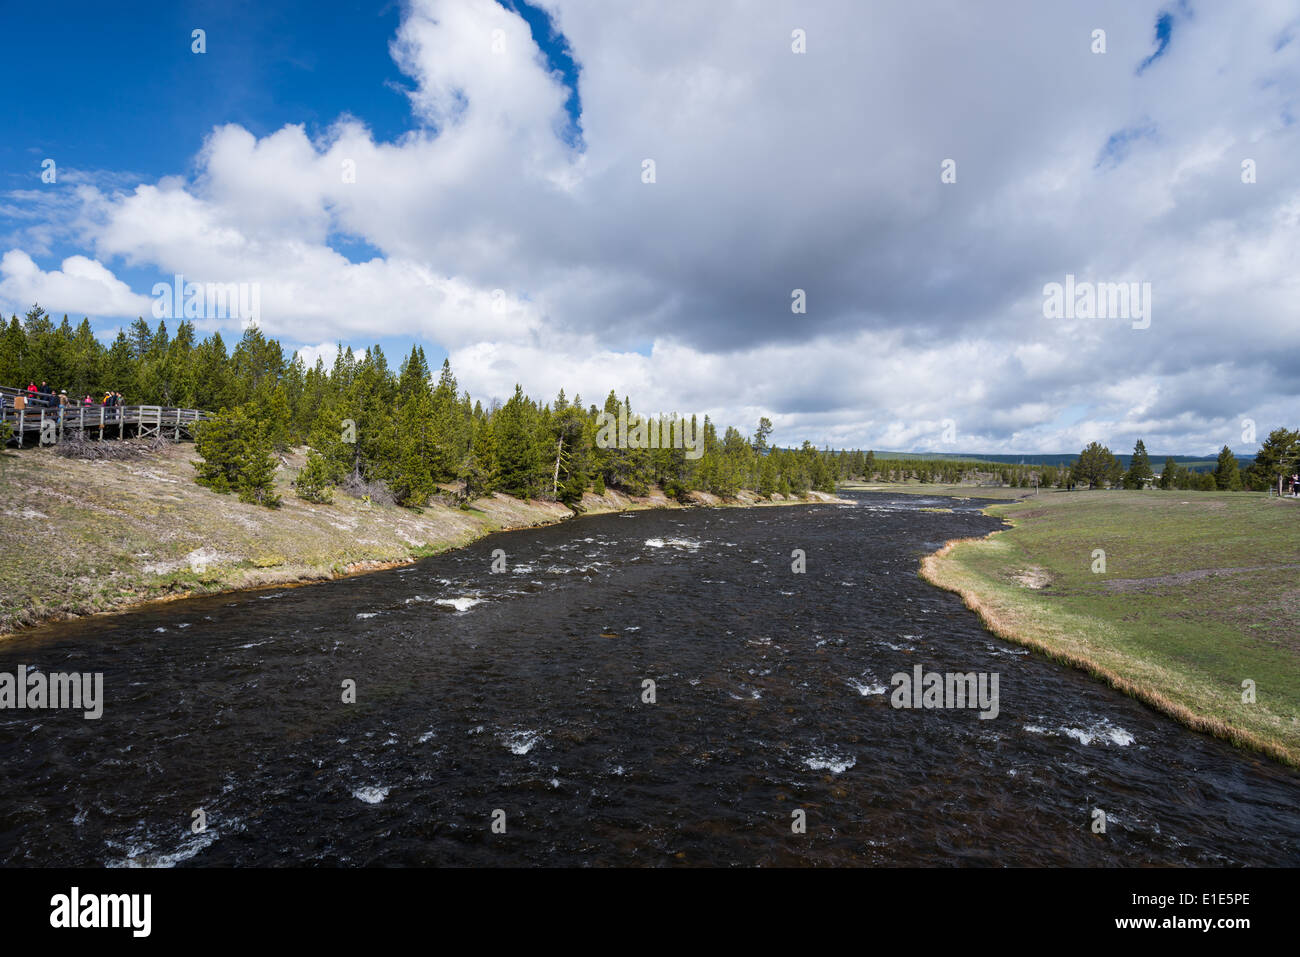 The Firehole River. Yellowstone National Park, Wyoming, USA. Stock Photo